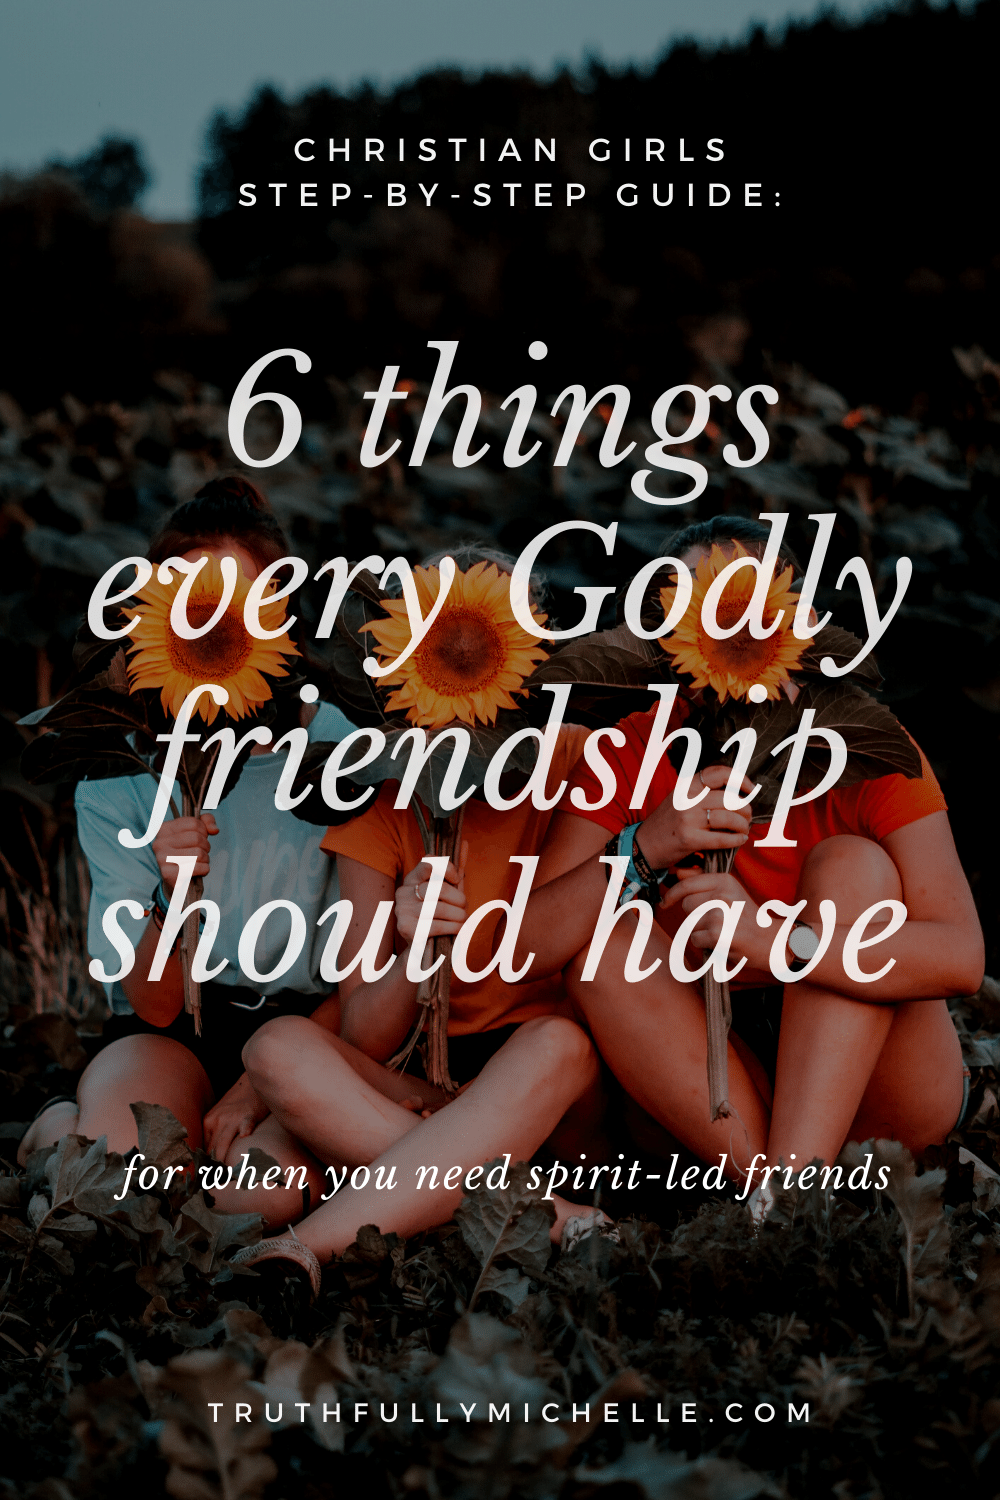 characteristics of a godly friend, how to be a godly friend, what is a godly friend, being a godly friend, building godly friendships, godly friendship woman, christian friendships, christian friends